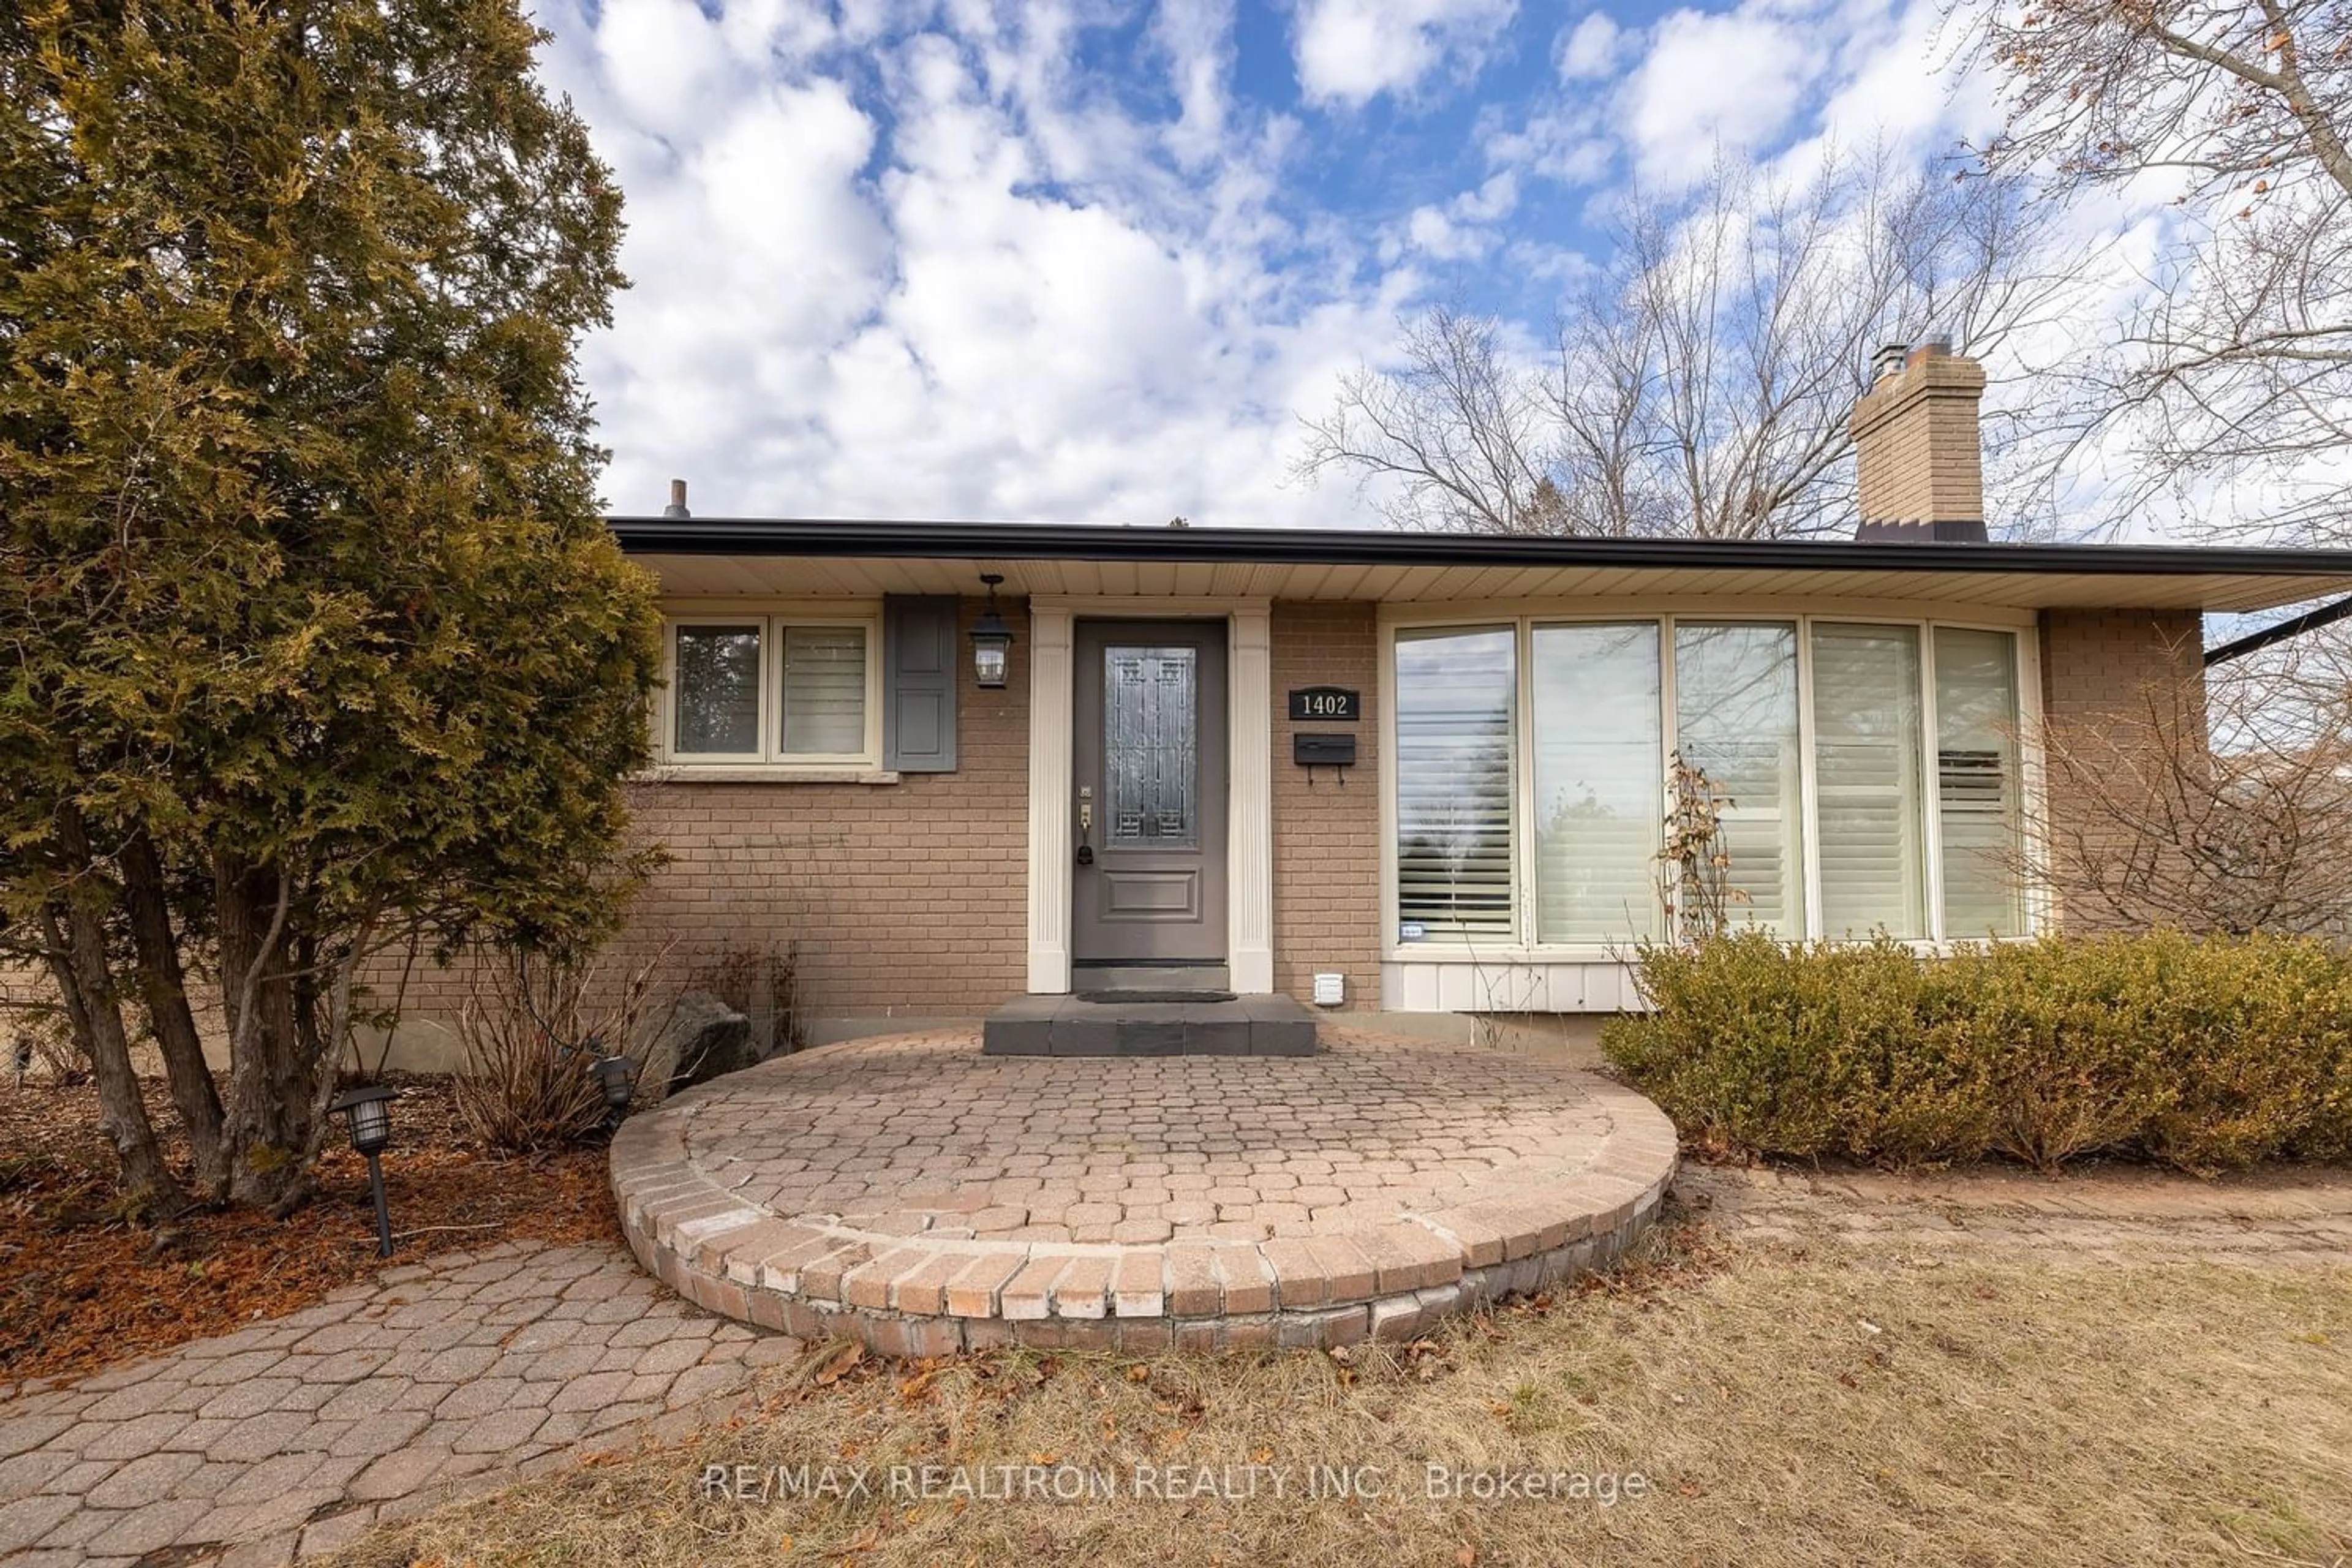 Home with brick exterior material for 1402 Gainsborough Dr, Oakville Ontario L6H 2H6